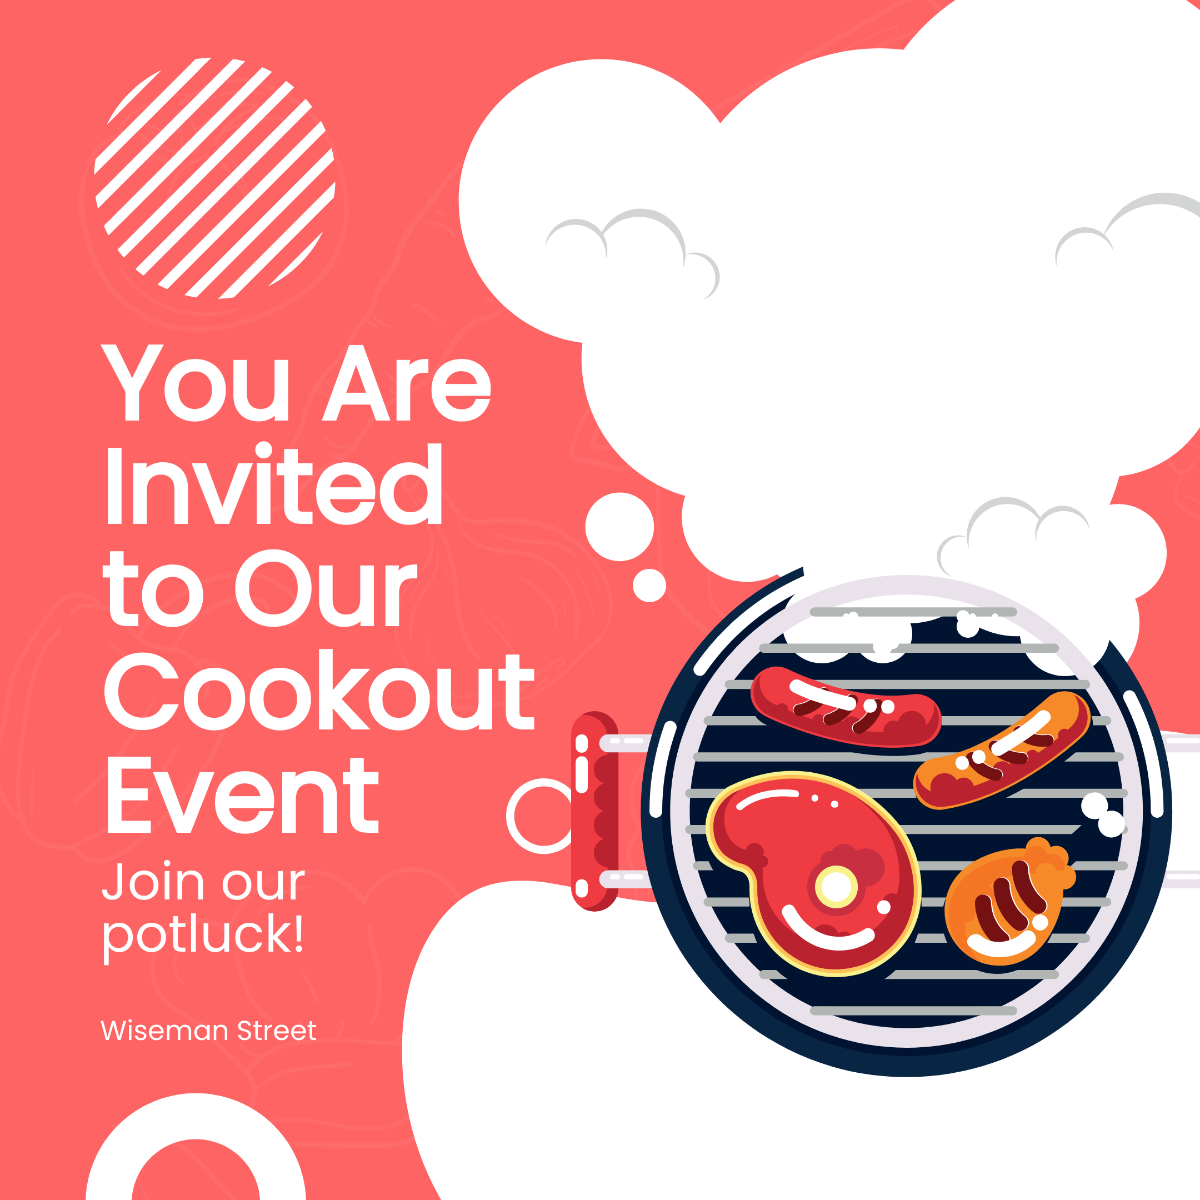 Free Cookout Event Instagram Post Template